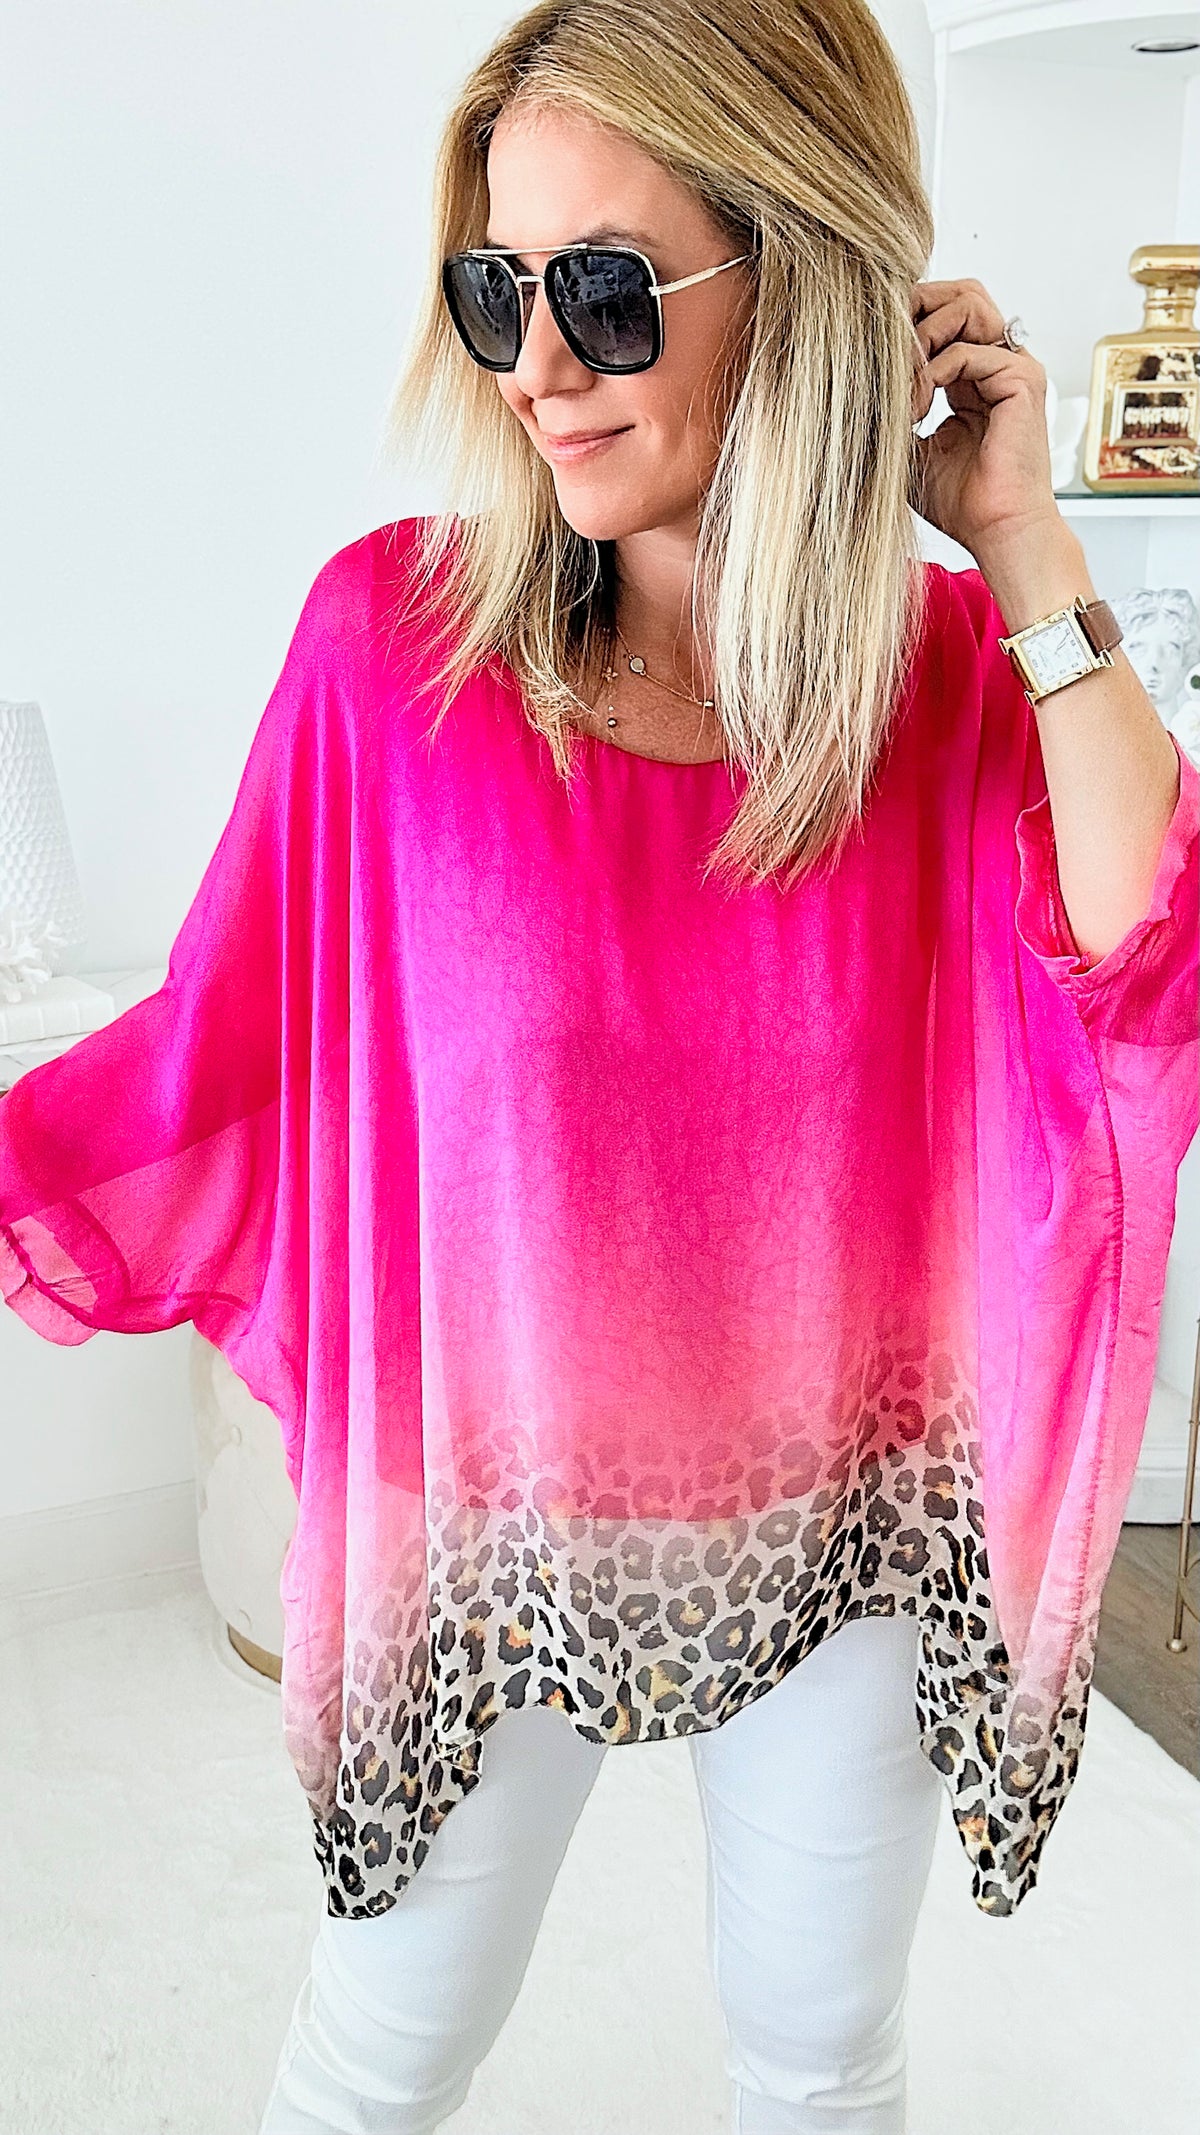 Wild Flowy Italian Top - Fuchsia-110 Short Sleeve Tops-Yolly-Coastal Bloom Boutique, find the trendiest versions of the popular styles and looks Located in Indialantic, FL